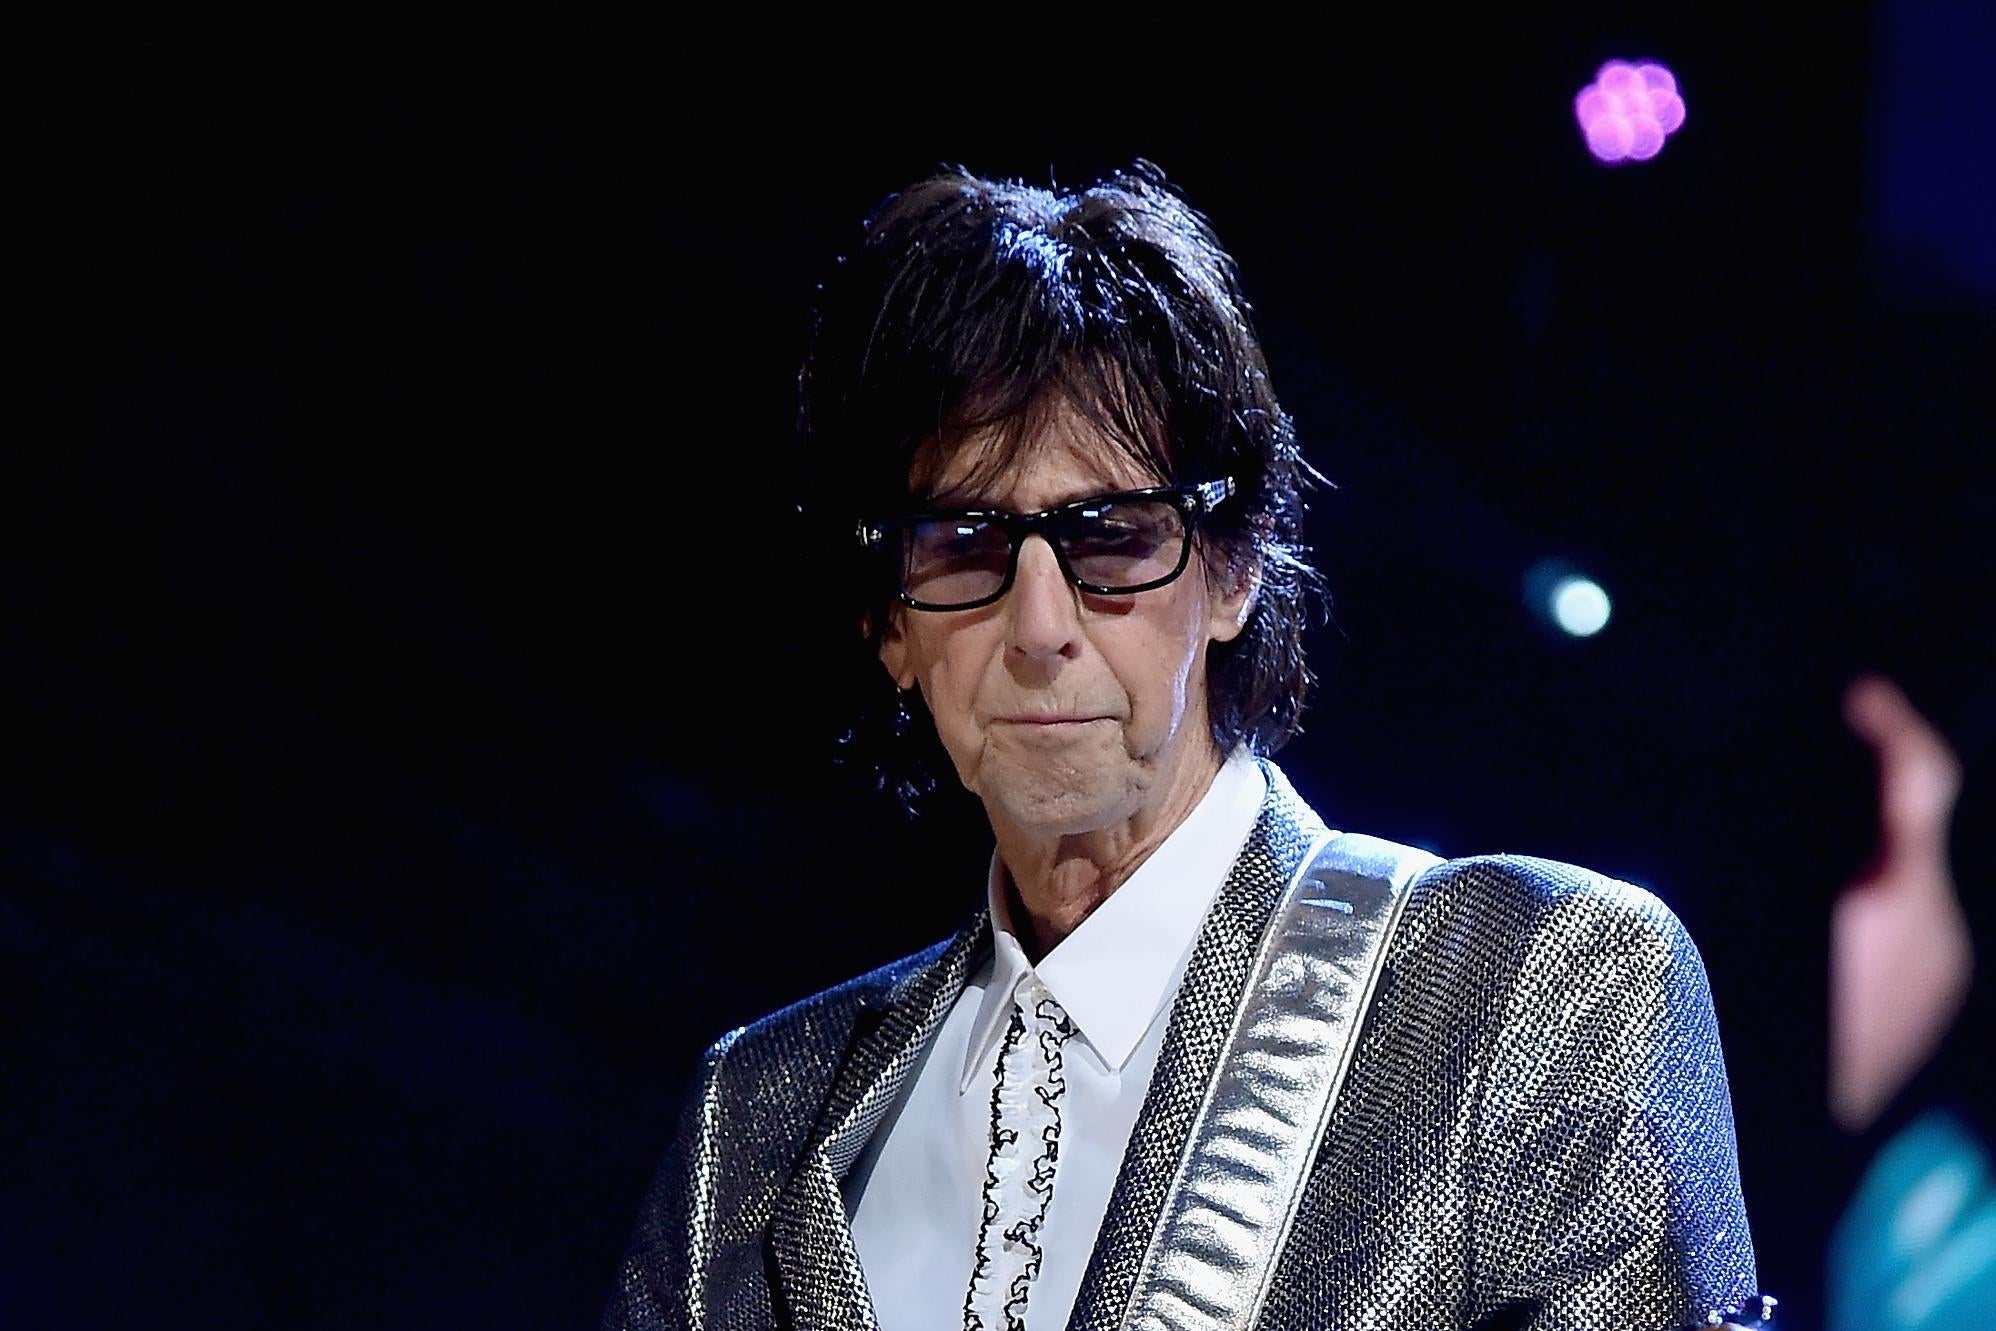 Ric Ocasek playing a guitar on stage.